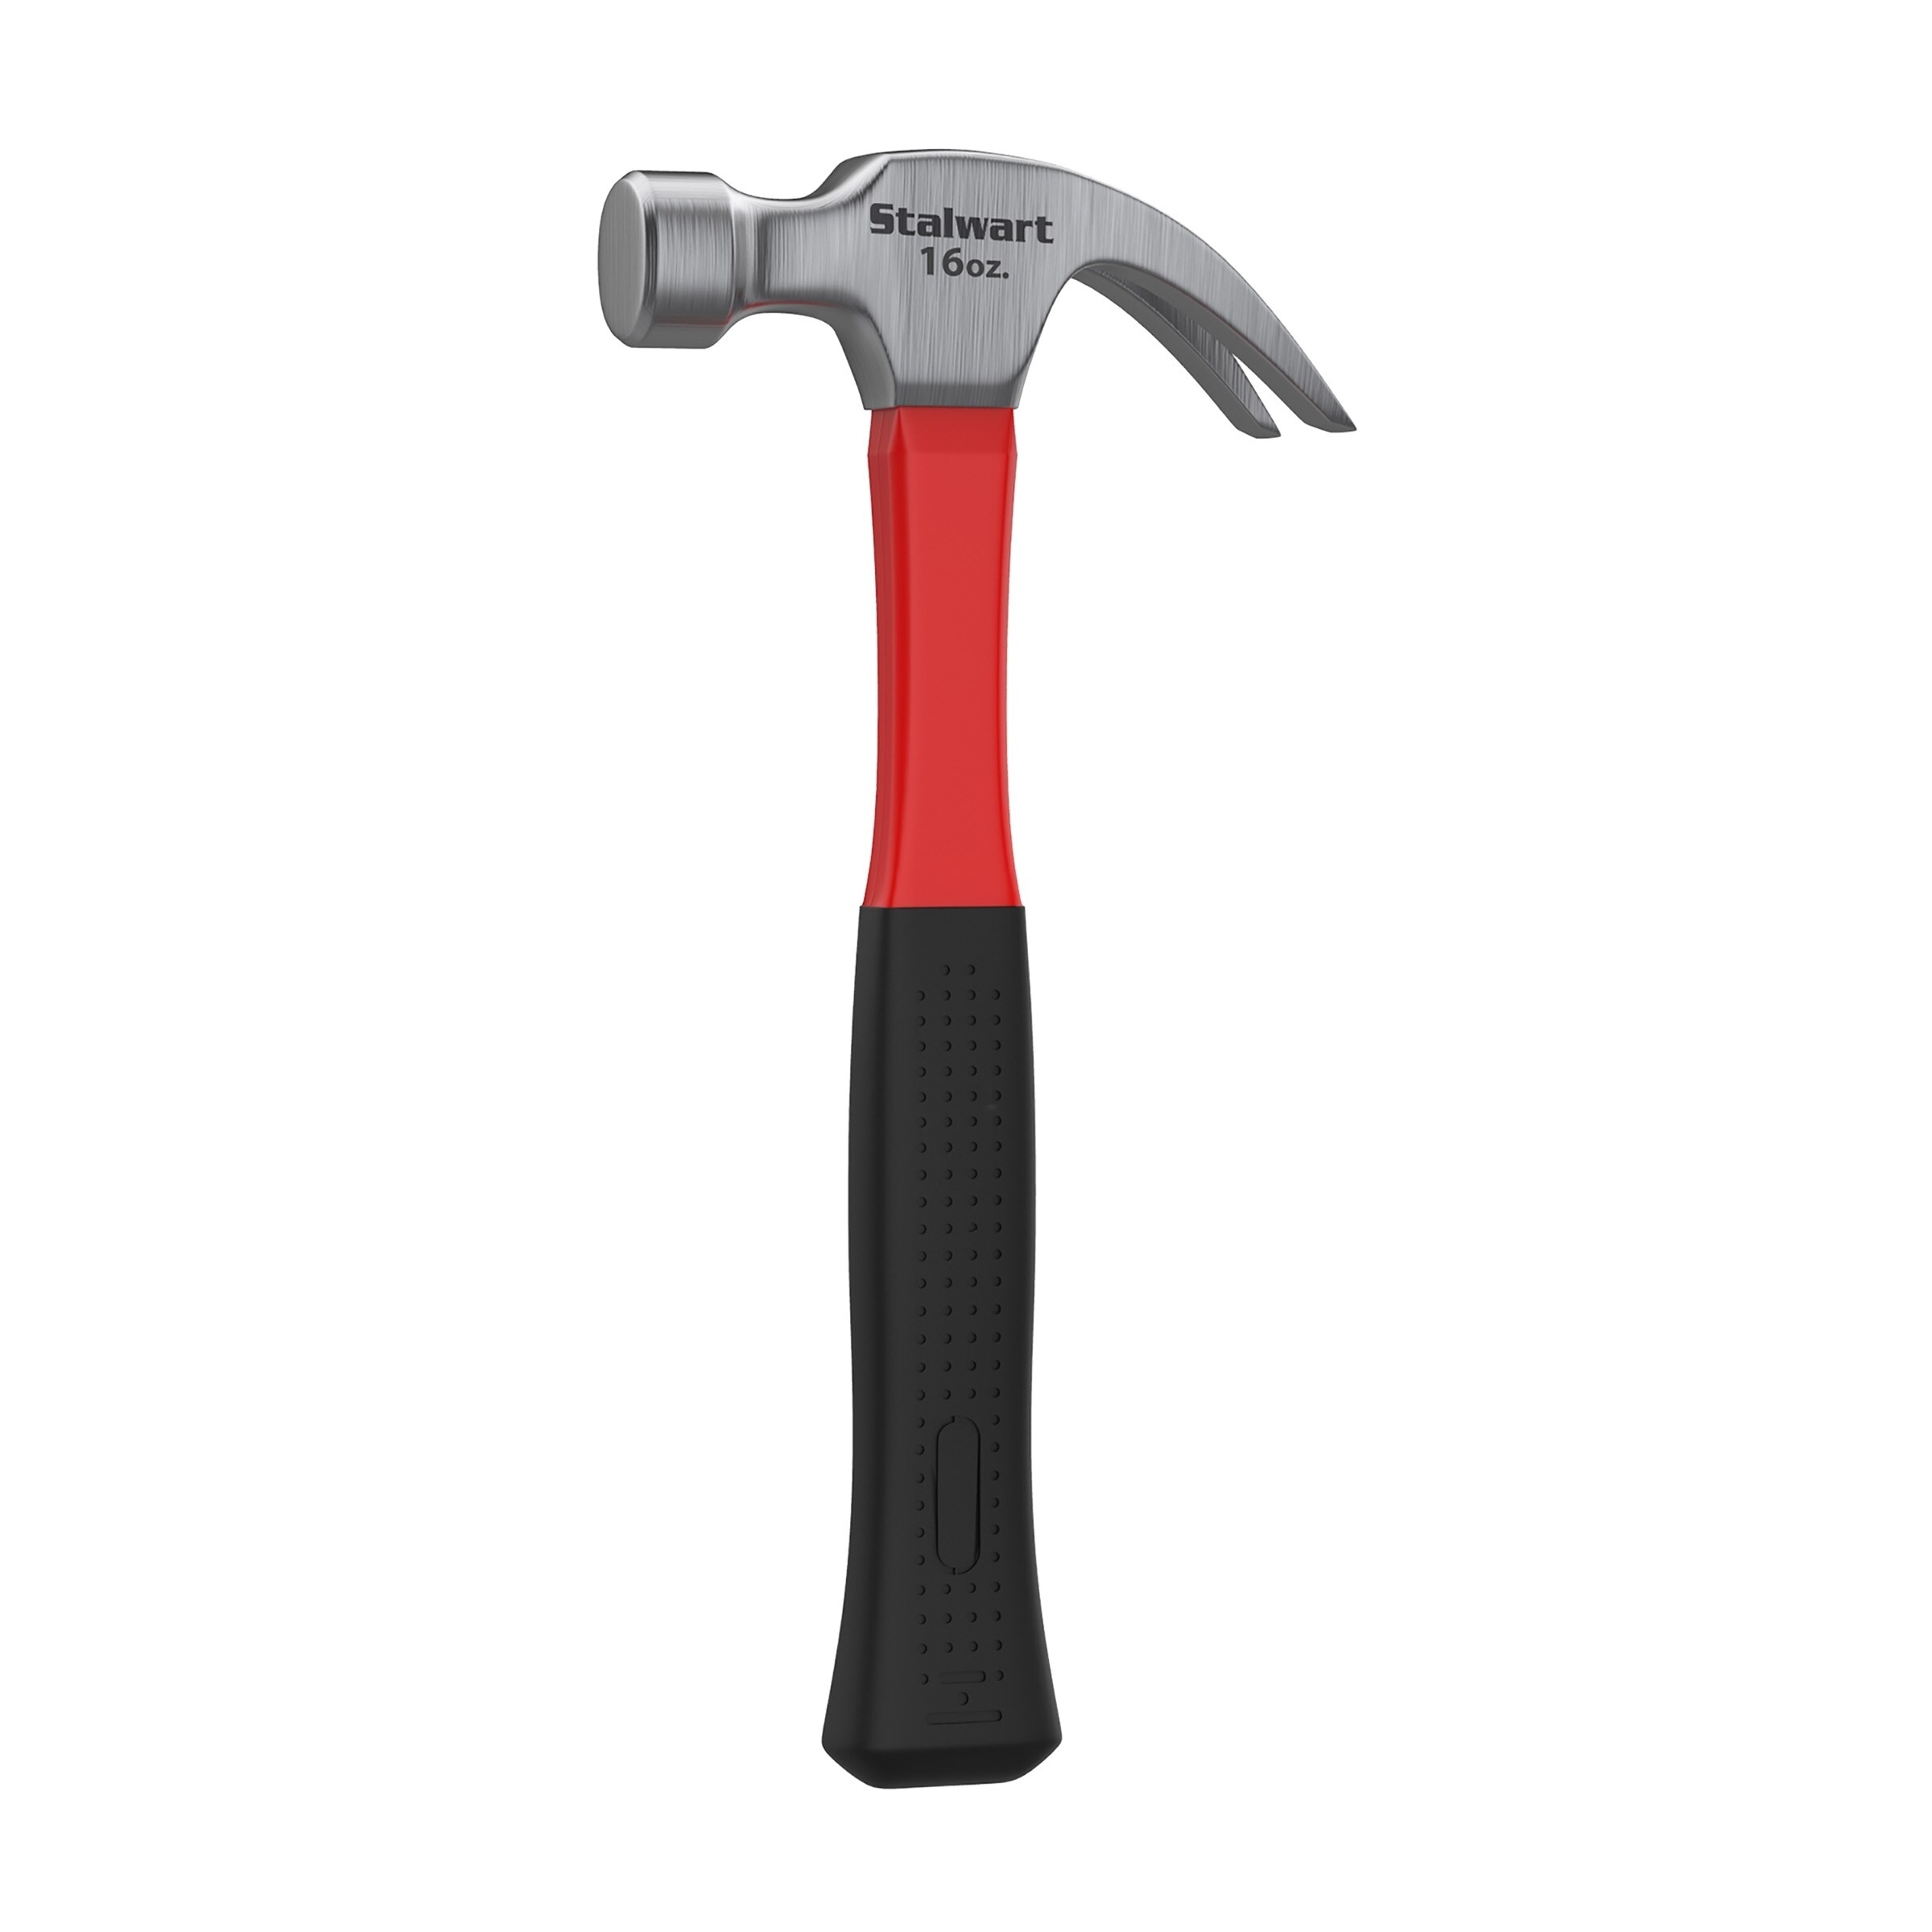 Fiberglass Claw Hammer - Comfort Grip Handle, Curved Rip Claw, 16